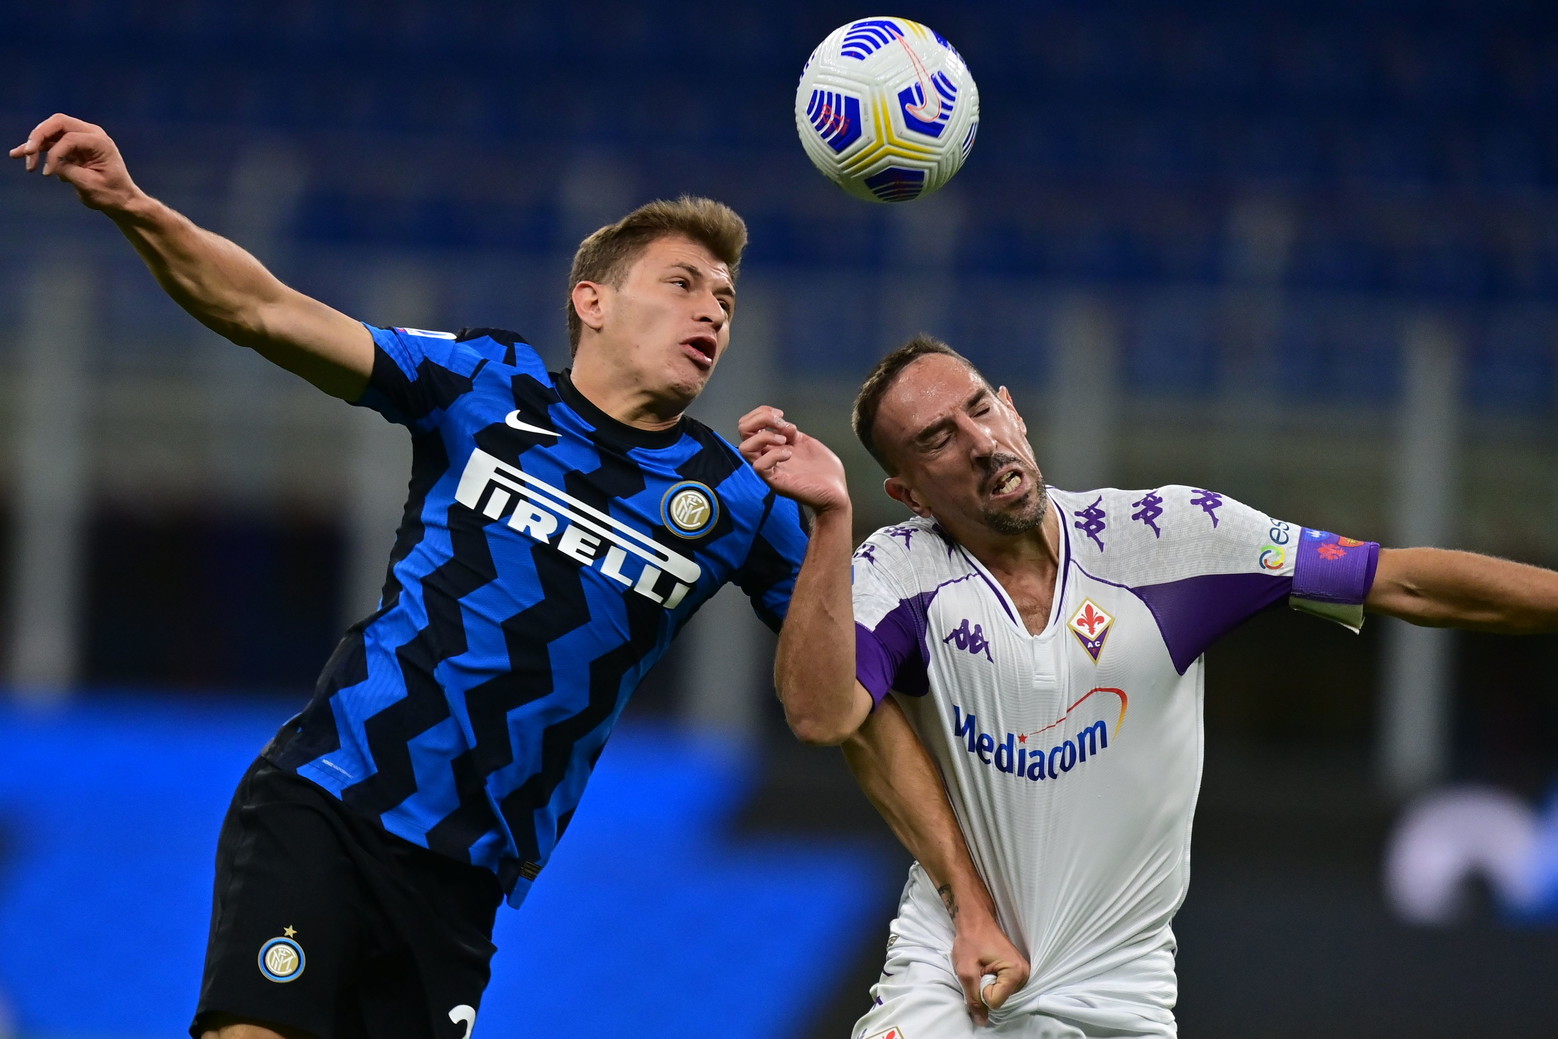 Pazza Inter is back! Inter grabbed the three points in the Serie A 2020-21 debut at the end of an epic game which saw them overcome Fiorentina 4-3